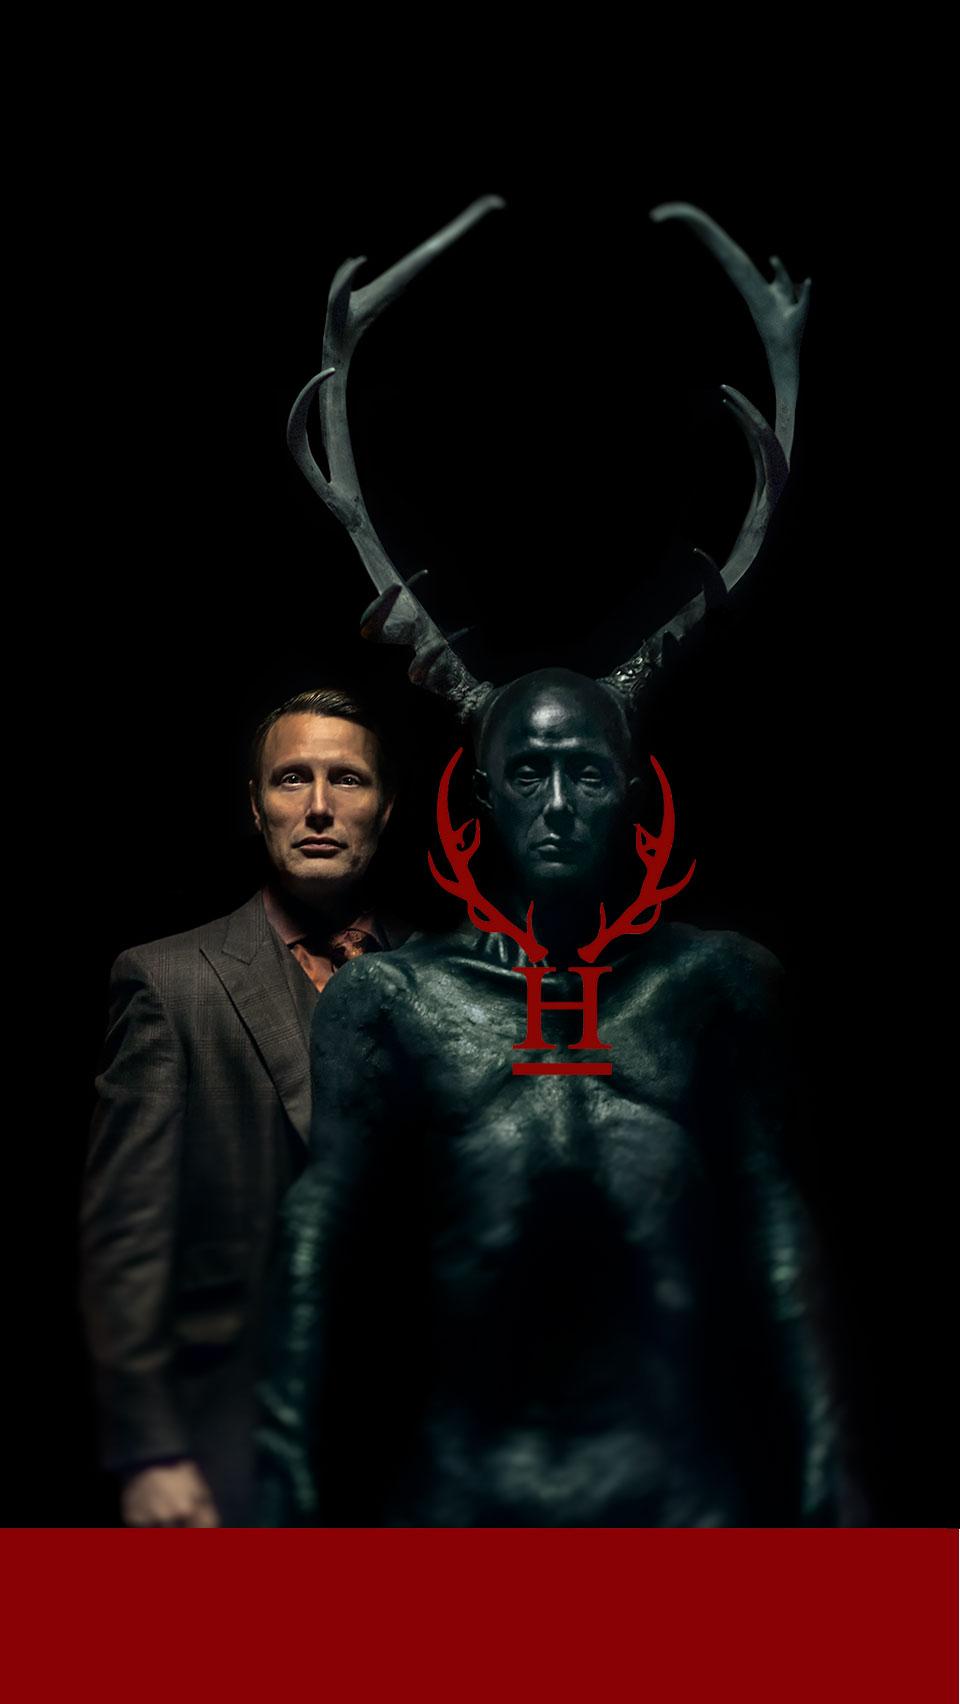 Bring Hannibal with you wherever you go with this phone Wallpaper